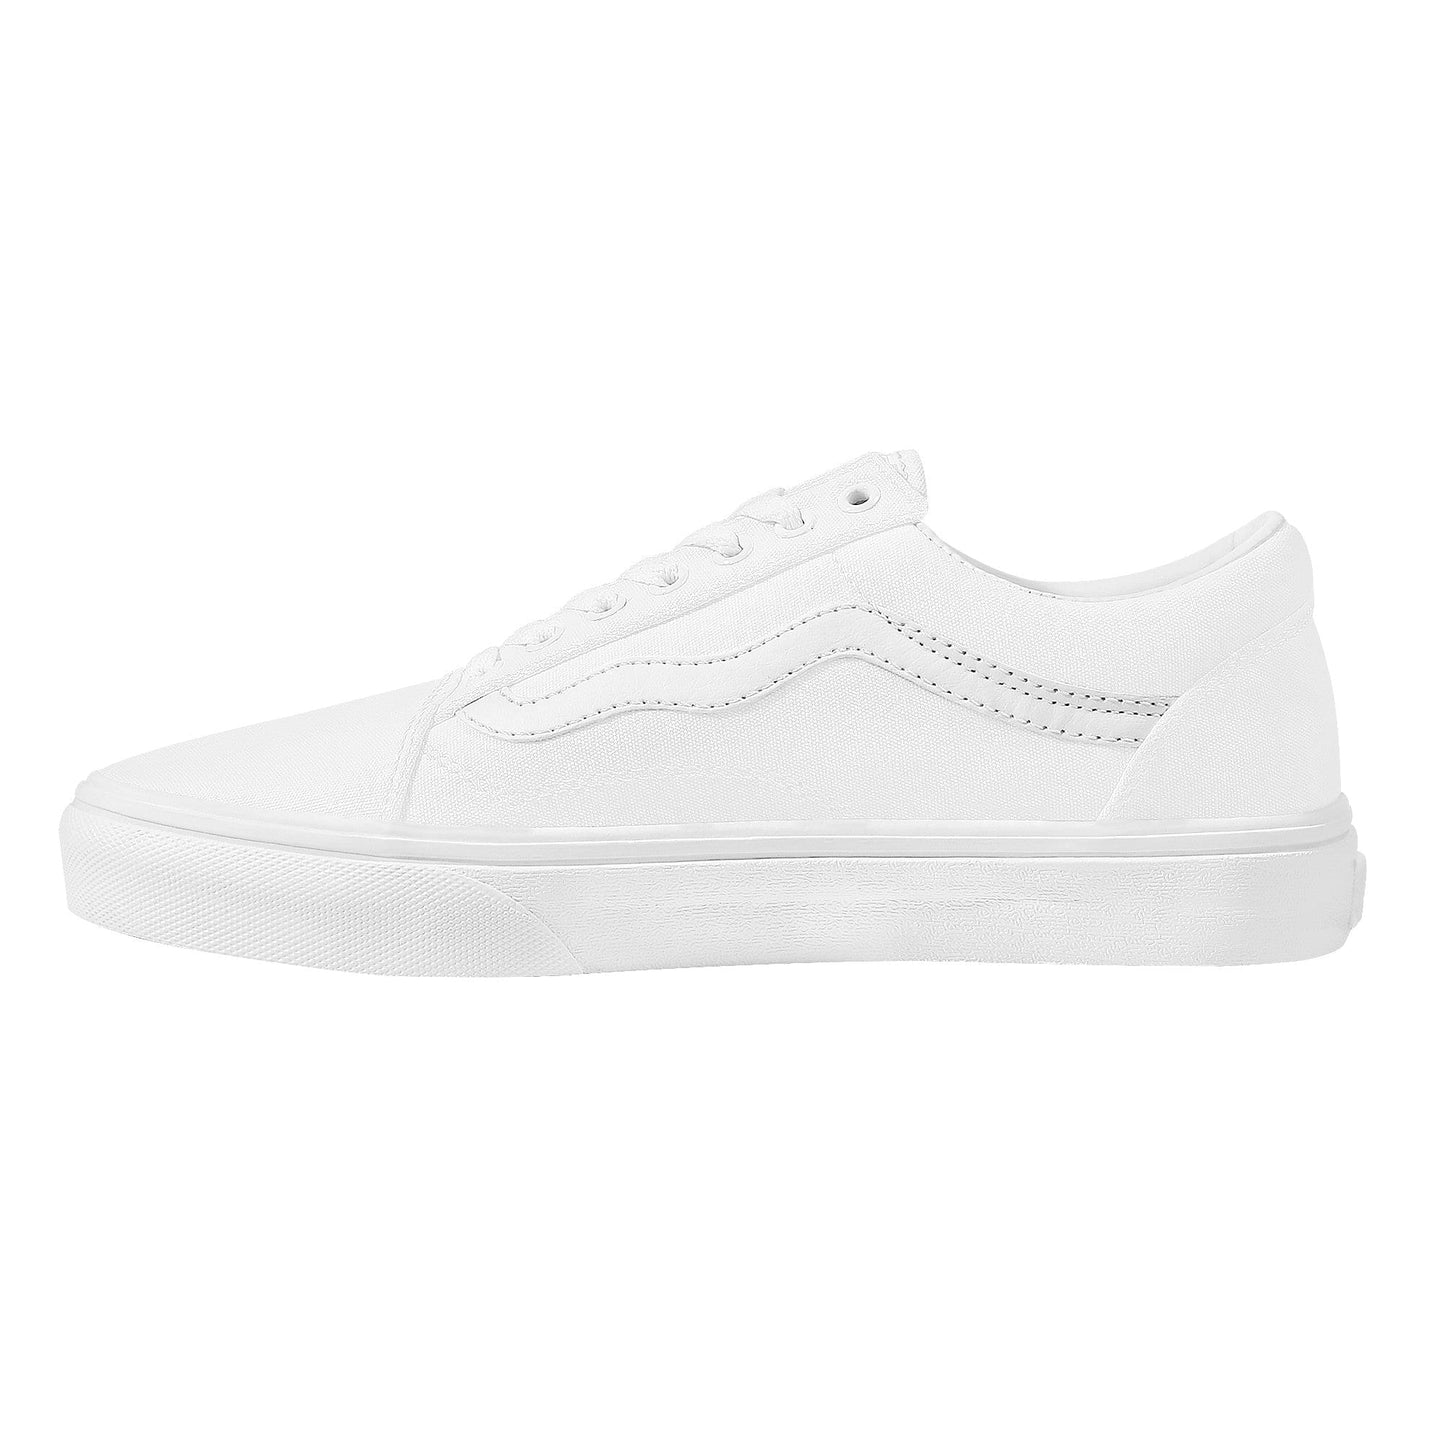 Custom Low Top Flat Sneakers -SF F21 Colloid Colors 